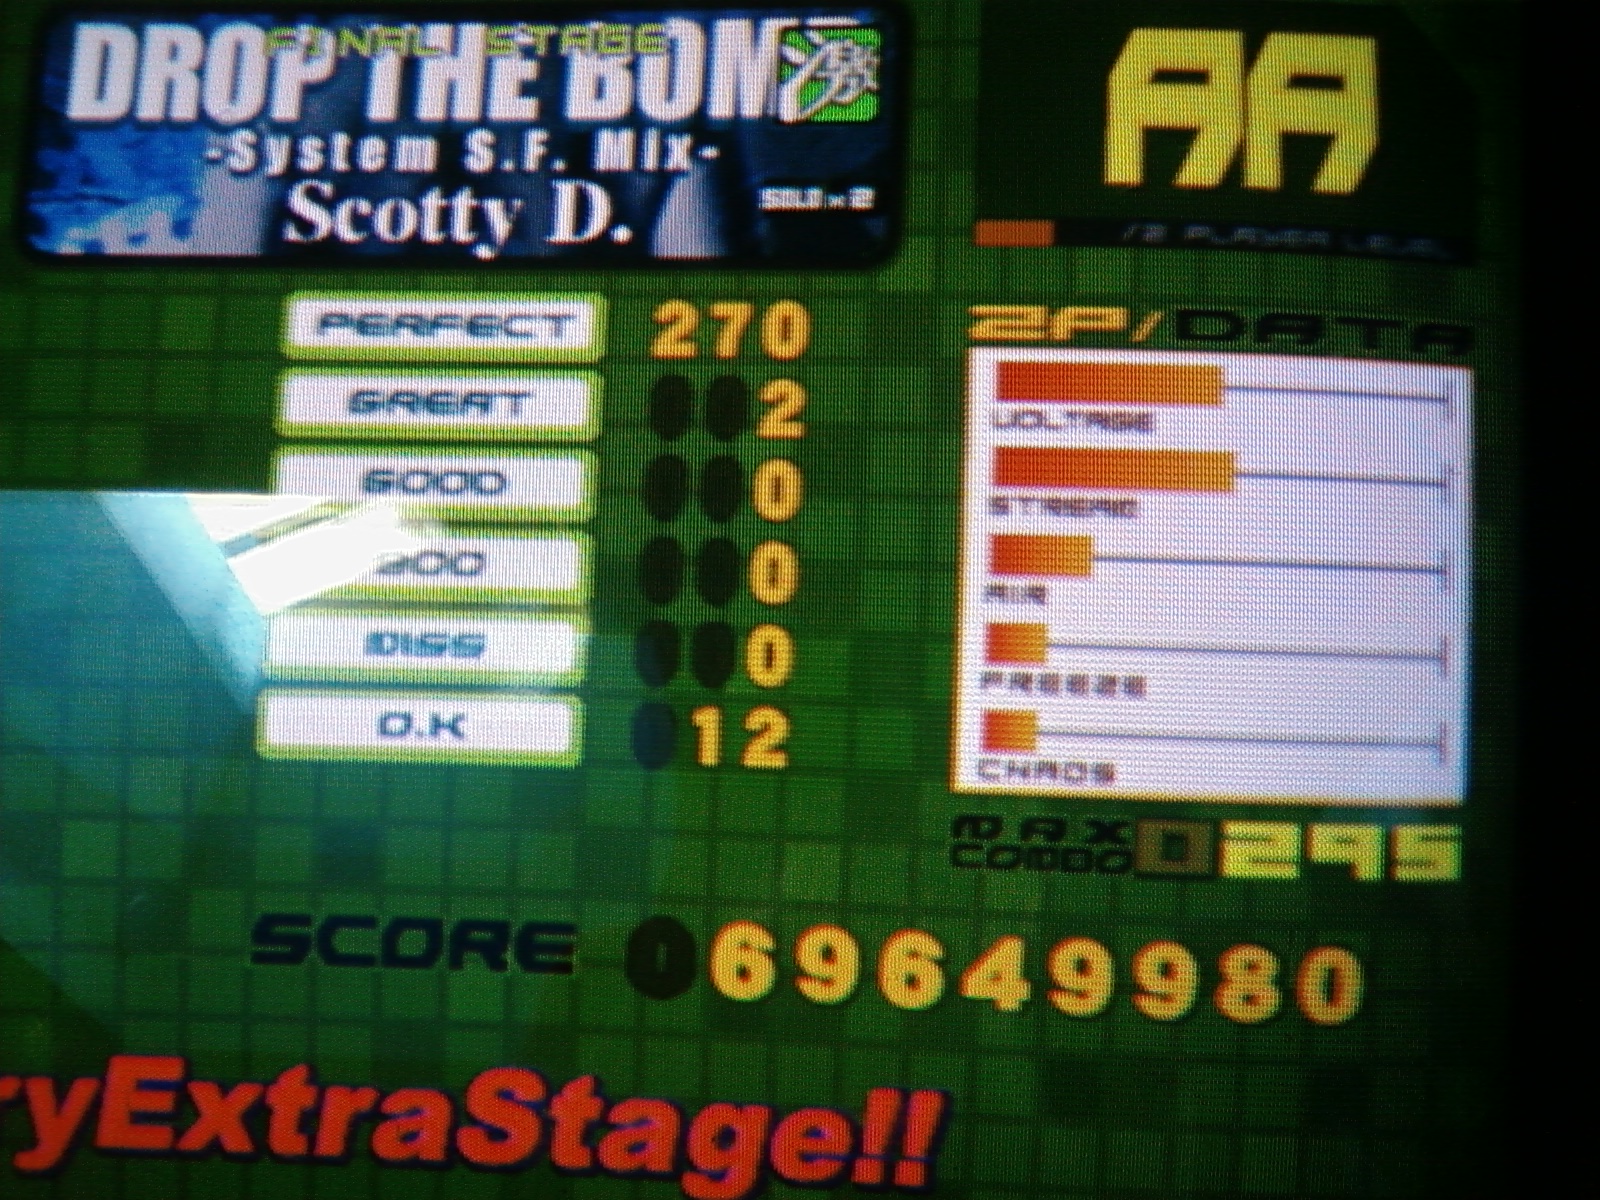 DROP THE BOMB almost AAA ;__;